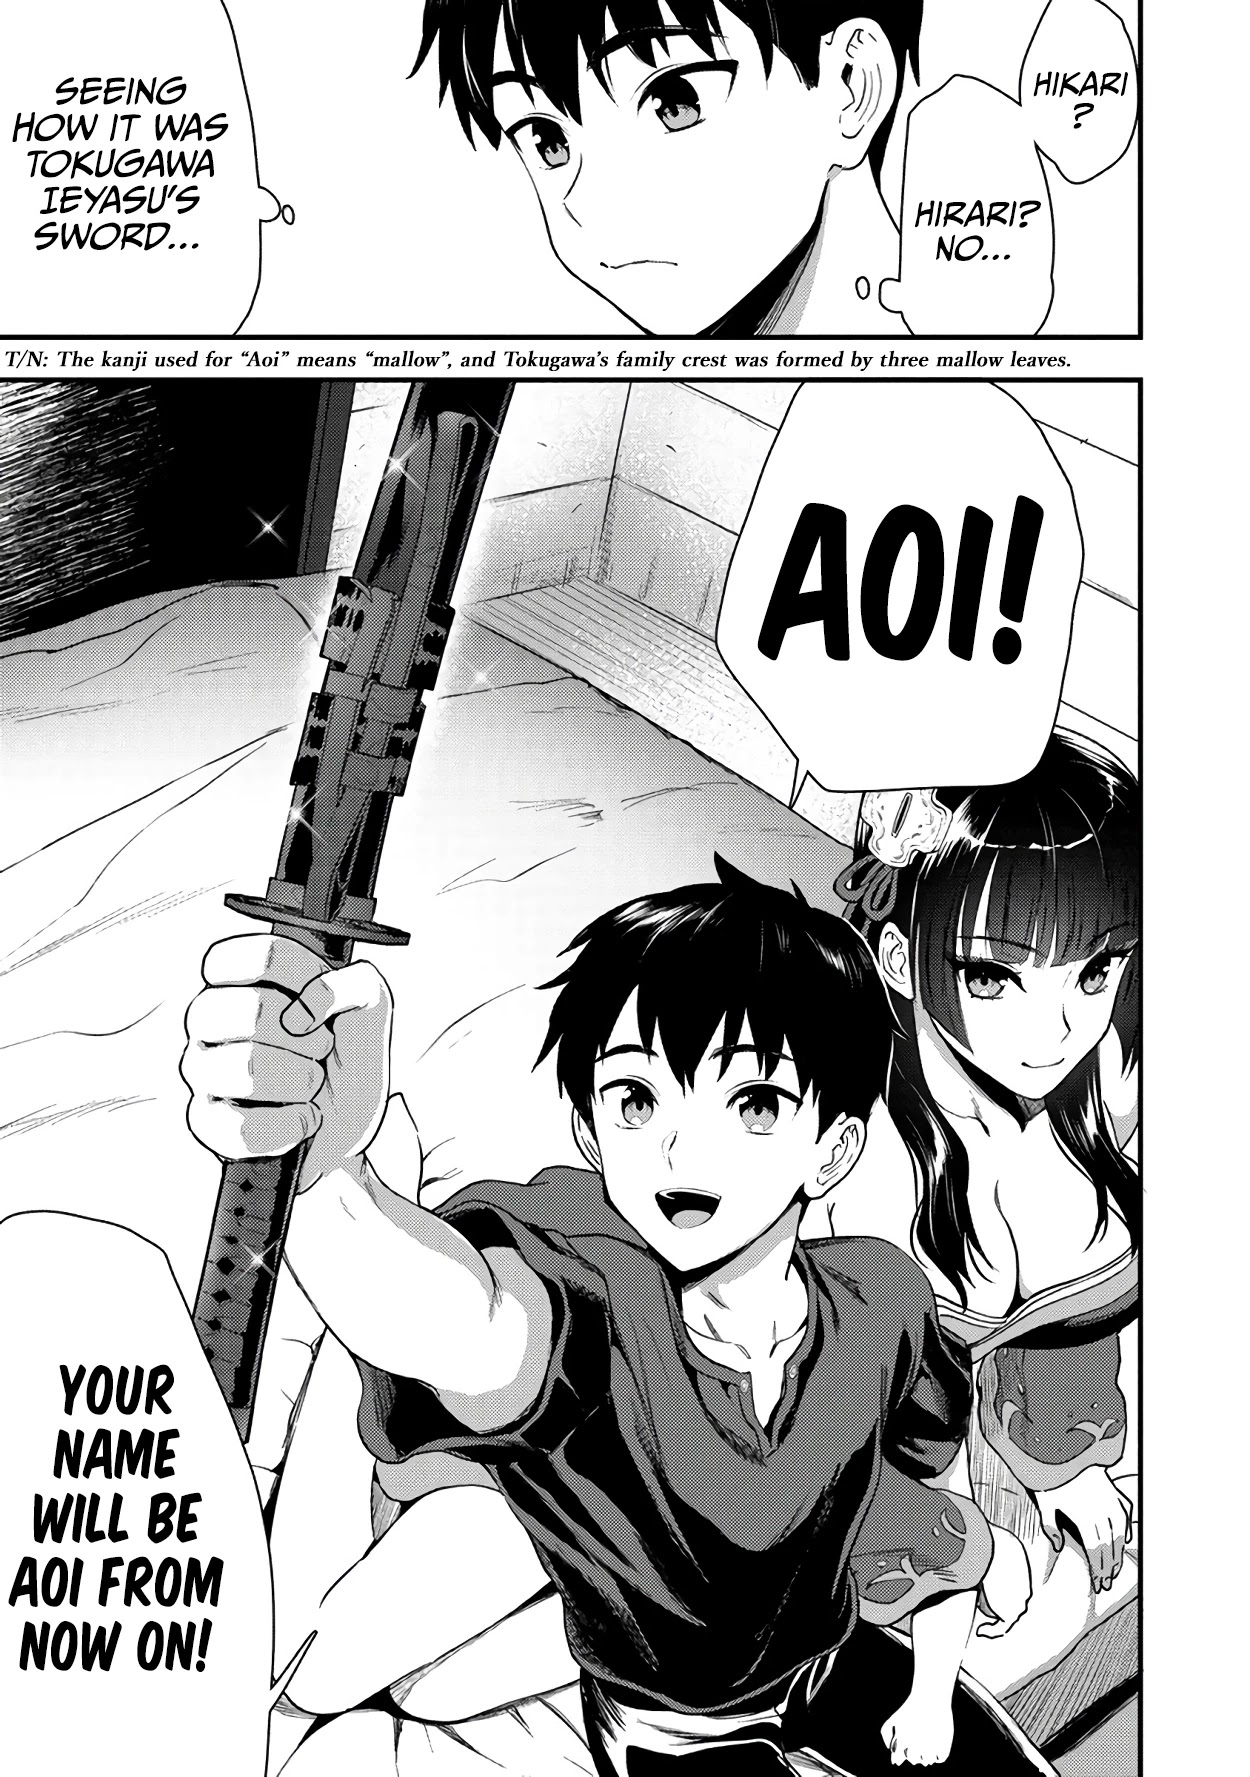 The Cursed Sword Master’S Harem Life: By The Sword, For The Sword, Cursed Sword Master Chapter 20